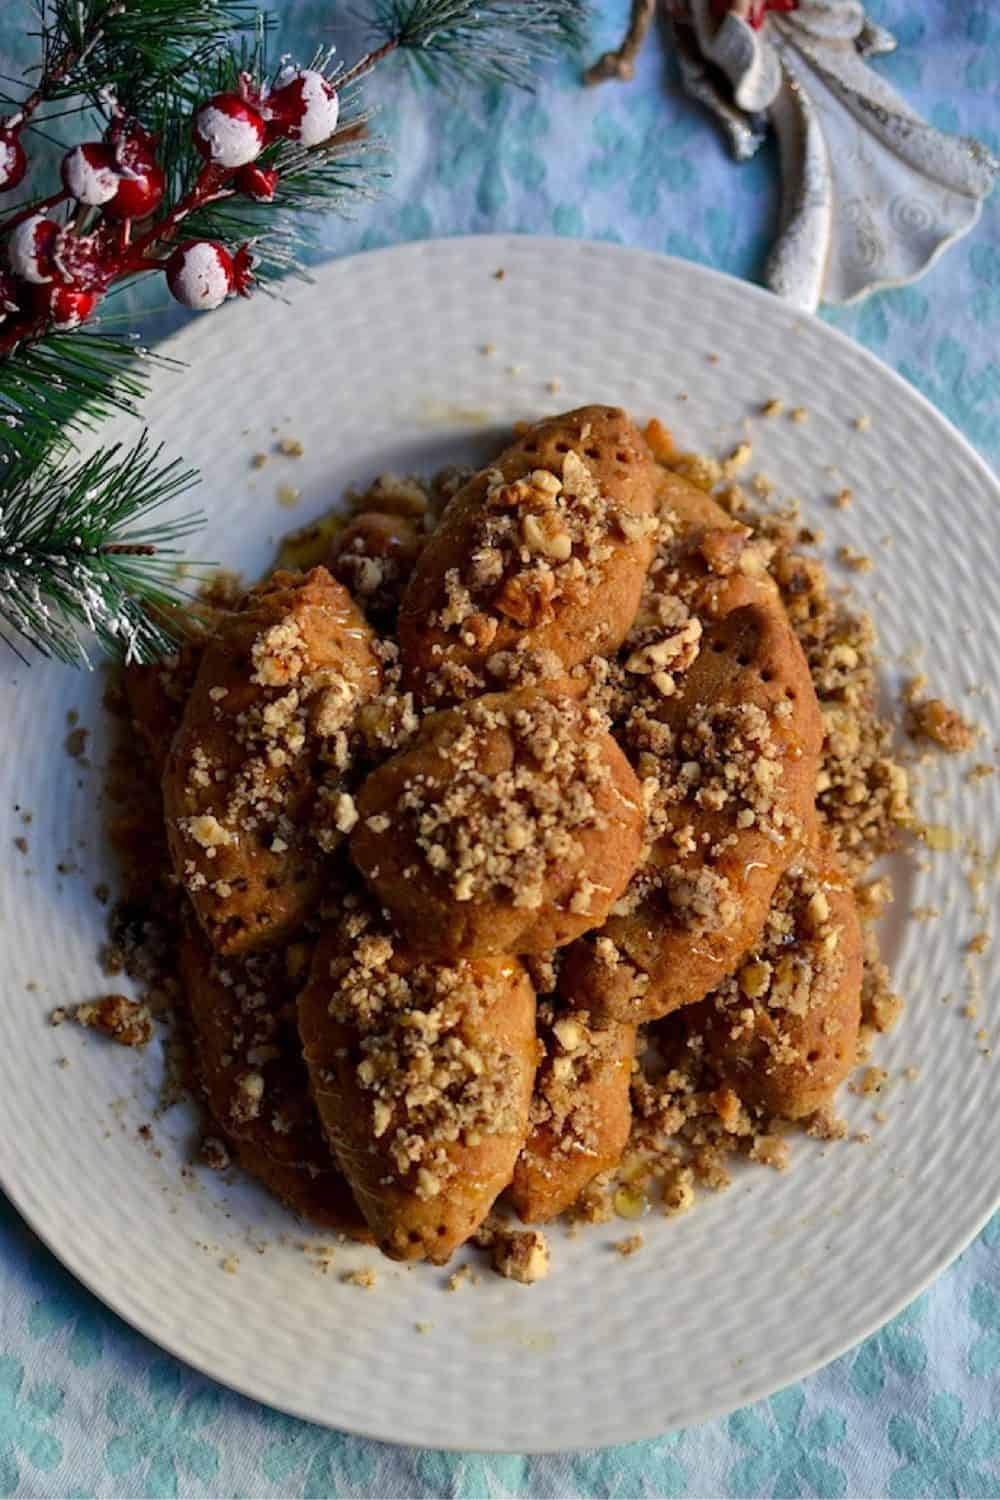 Serve the Christmas Cookies (Melomakarona) | Greek | Low in Calories. maninio.com